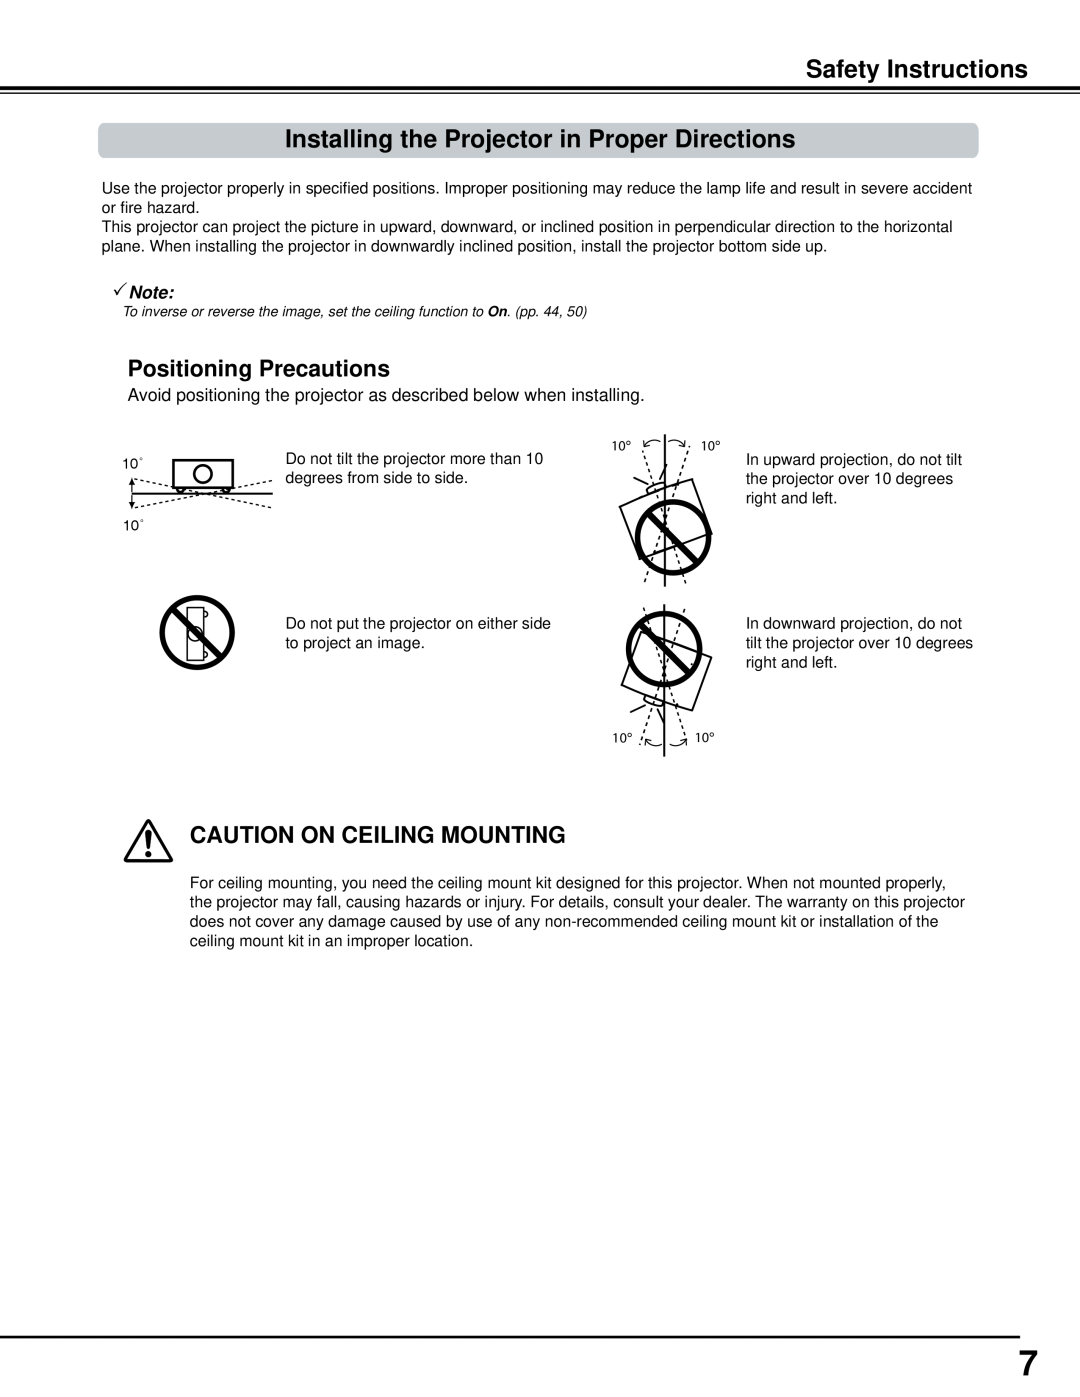 Sanyo PLC-WM5500 Safety Instructions Installing the Projector in Proper Directions, Positioning Precautions, Note 